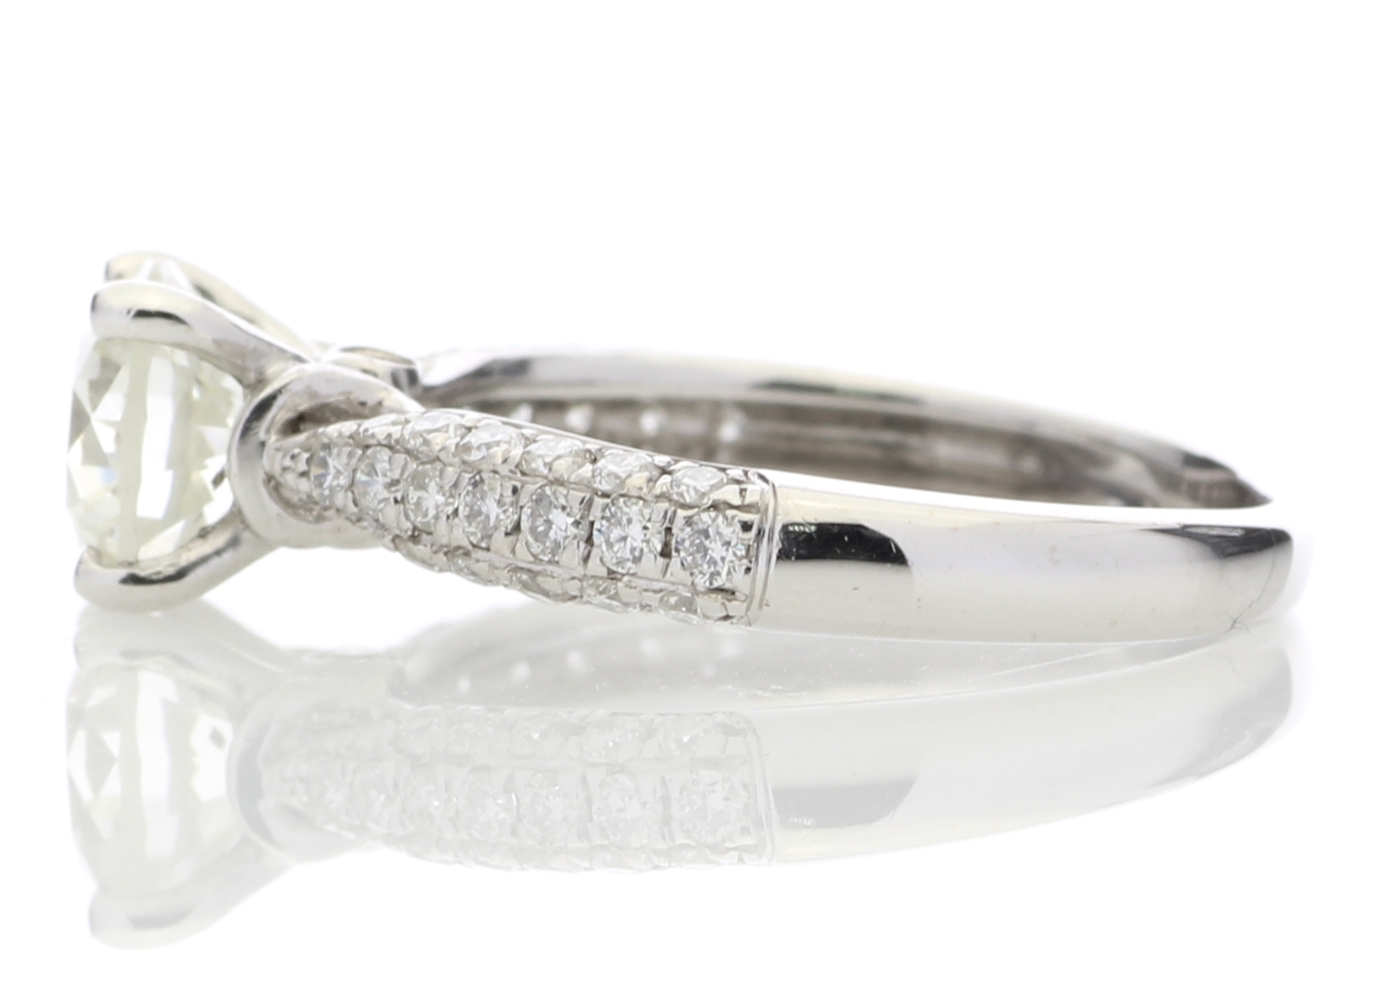 18ct White Gold Diamond Ring With Stone Set Shoulders 1.38 Carats - Valued By IDI £23,780.00 - A - Image 6 of 10